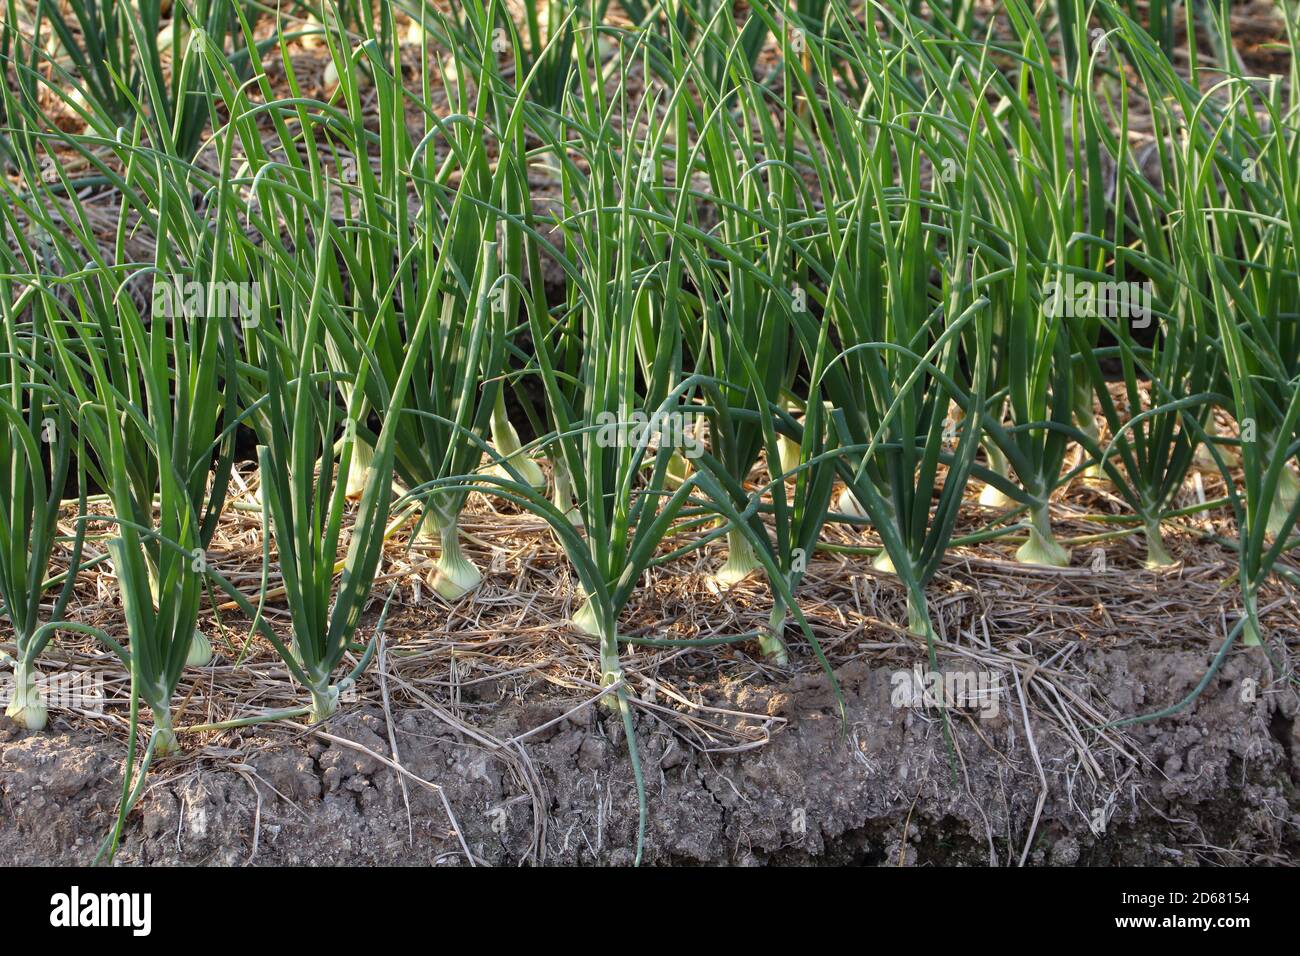 Onion growing on the vegetable garden bed Stock Photo